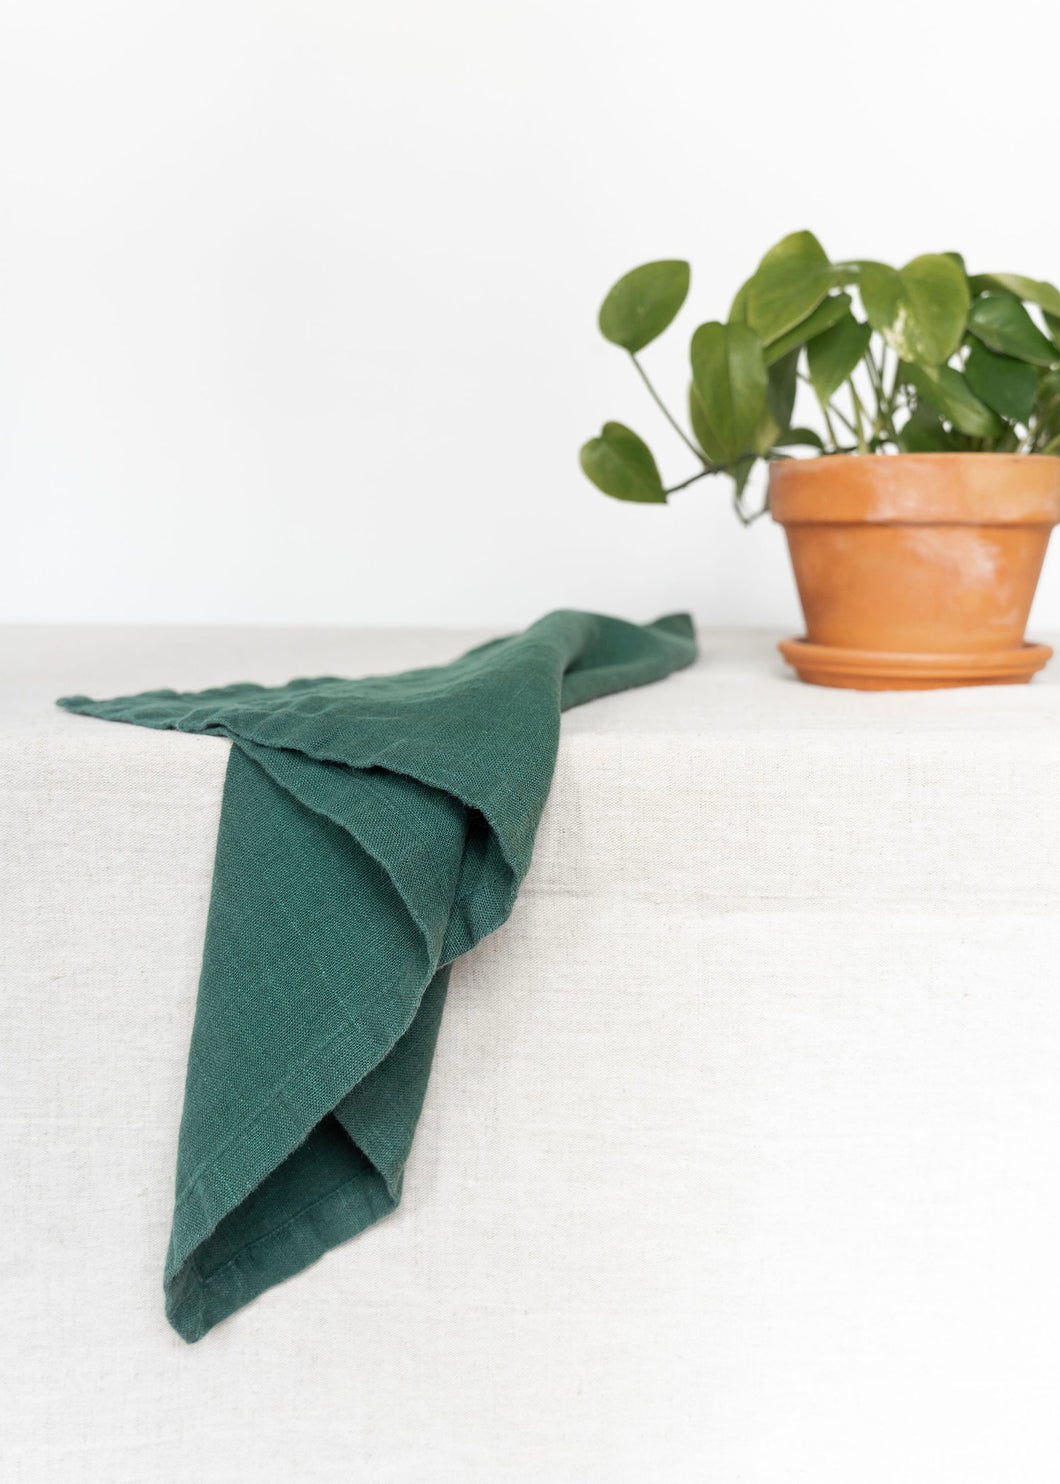 100% Linen Classic Napkins in Pine Green - Set of 4